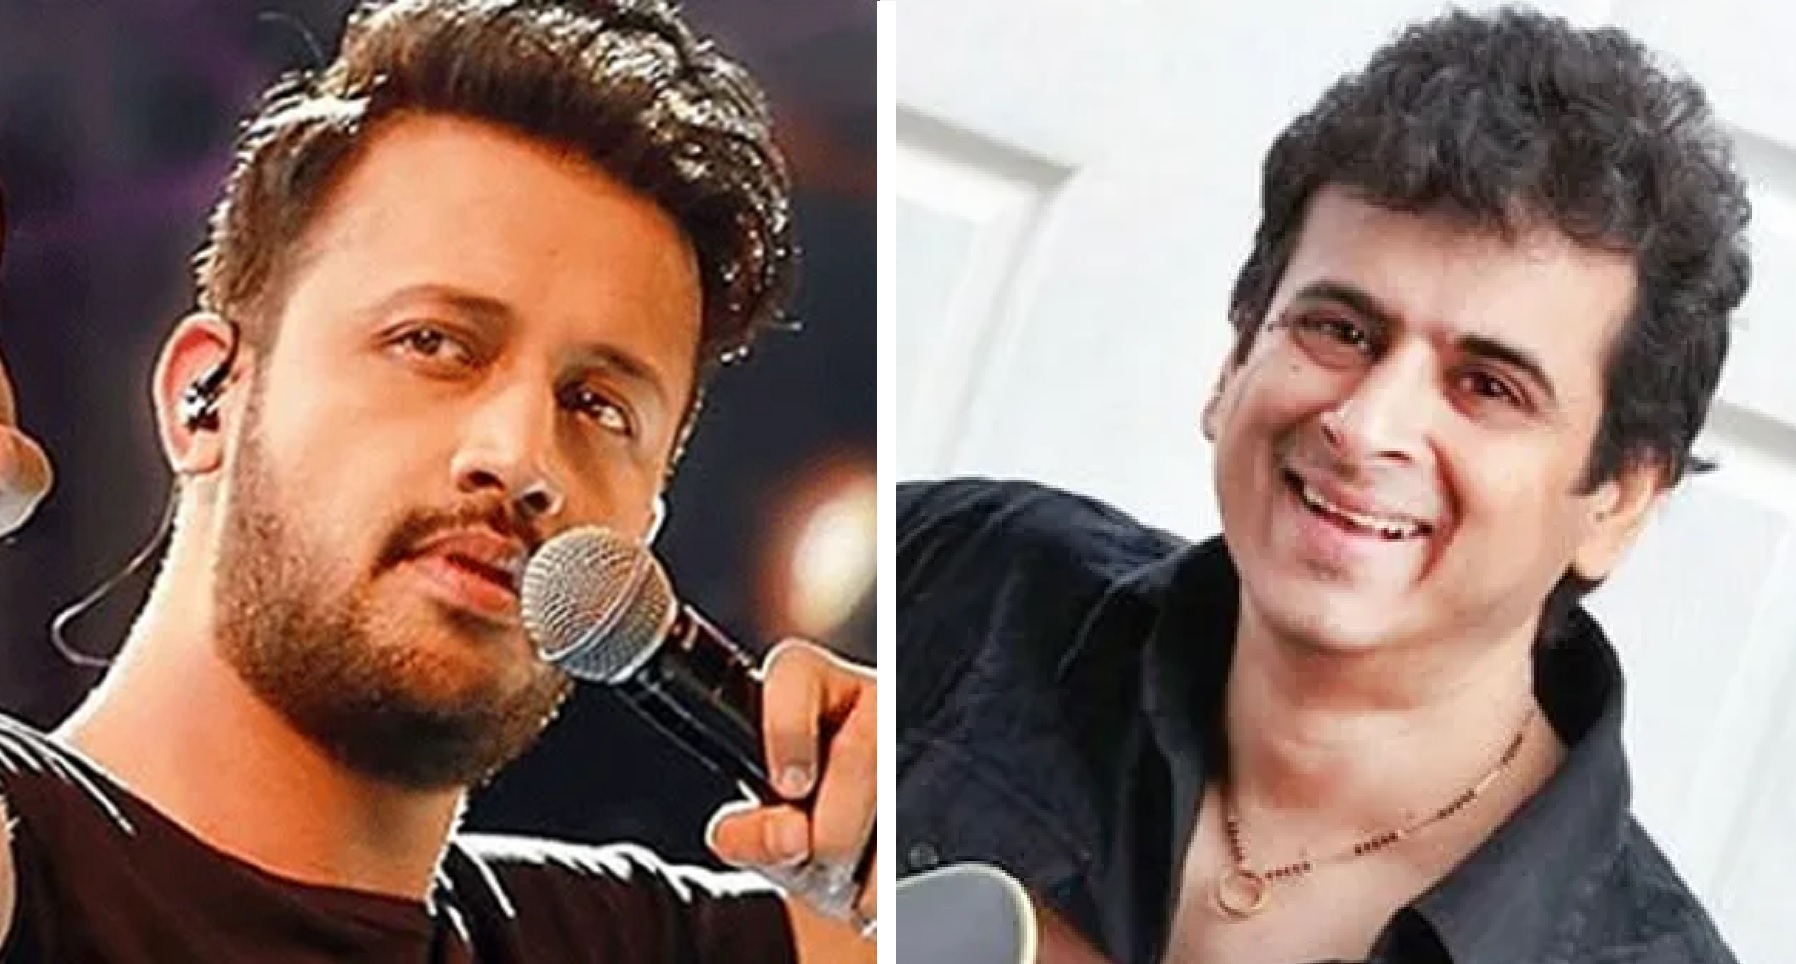 Singer Palash Sen Reacts To Criticism After He Praised Atif Aslam For His Impact On Bollywood Music